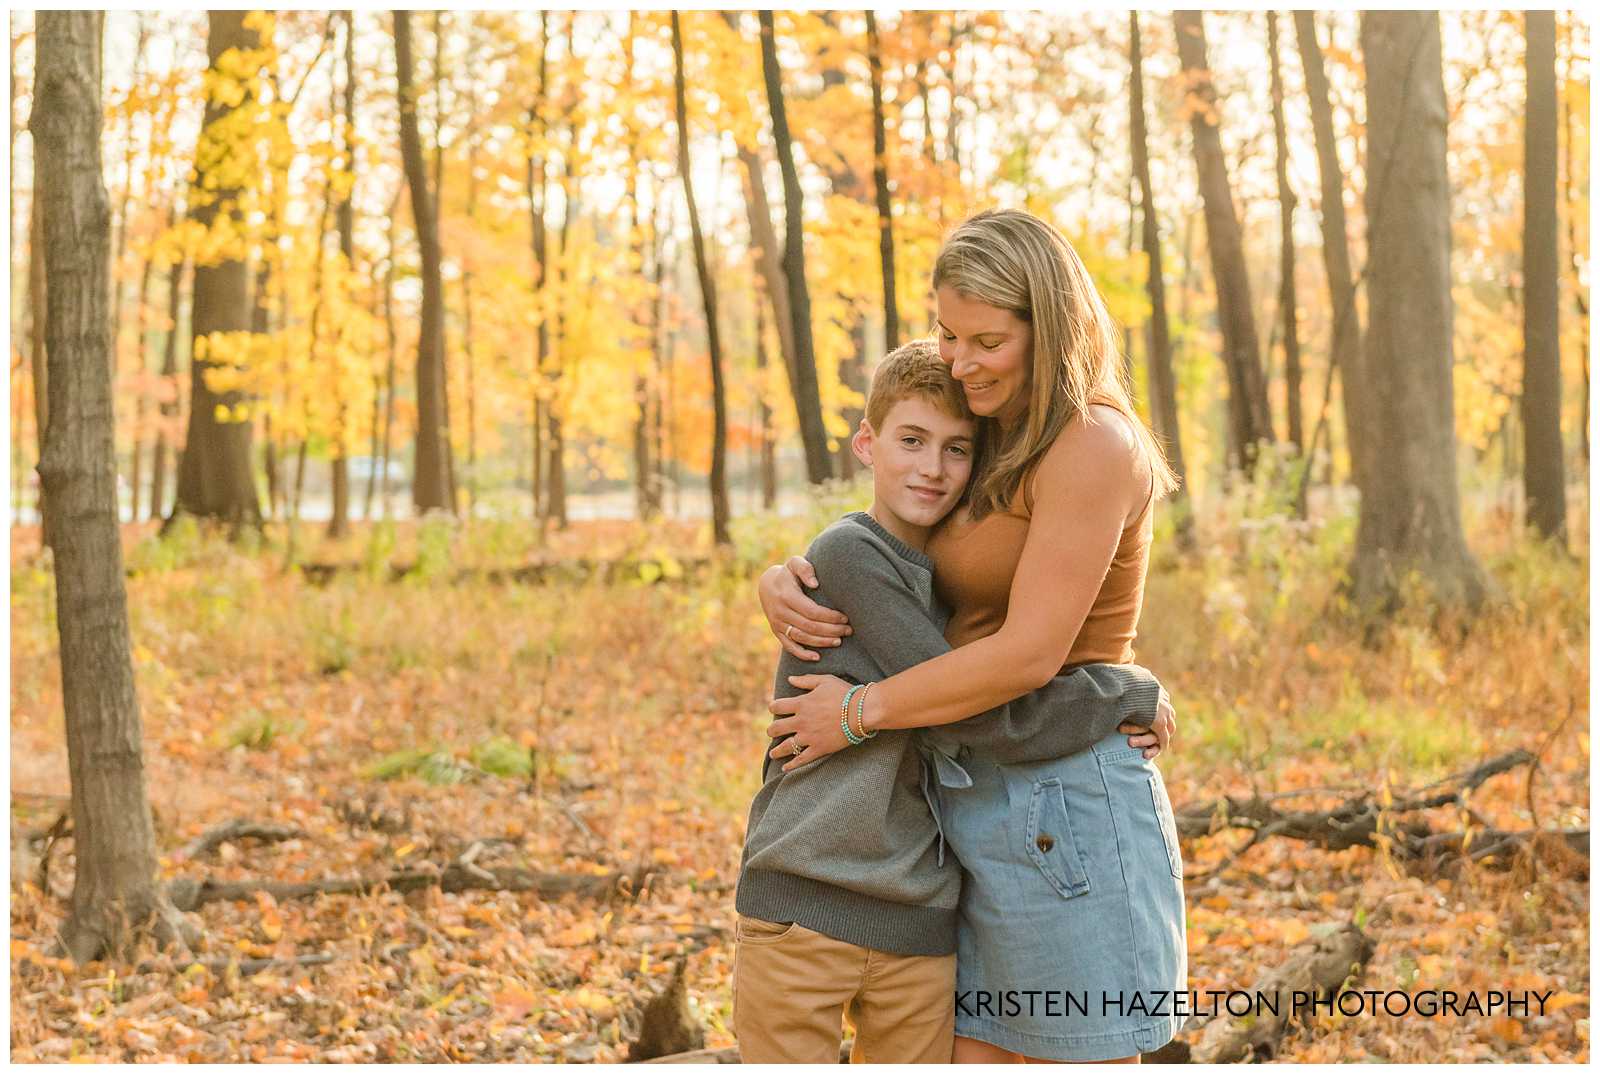 A teen boy hugs his mom at photographer Kristen Hazelton's River Forest IL Fall Mini Sessions